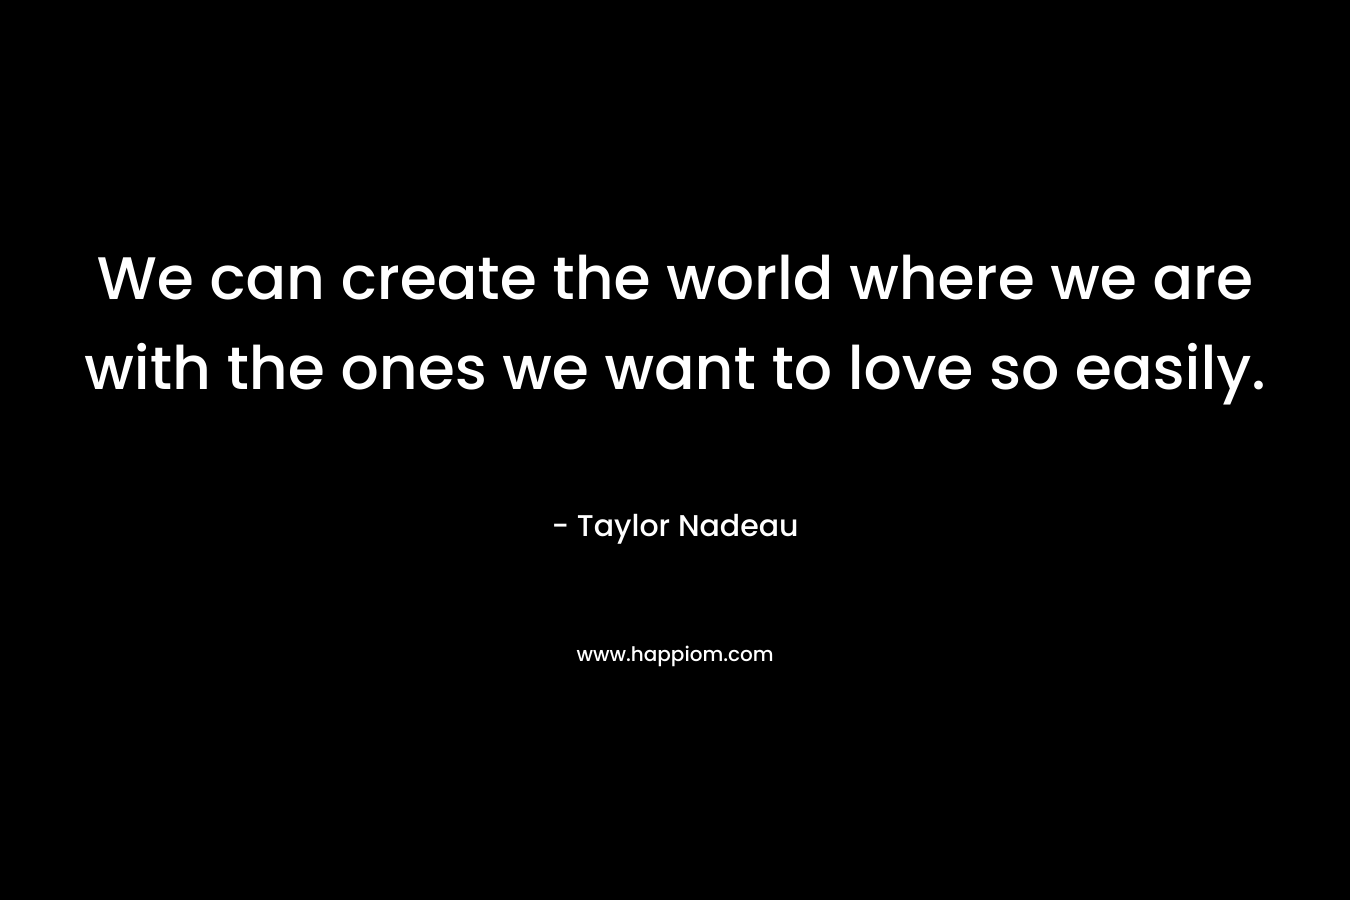 We can create the world where we are with the ones we want to love so easily.